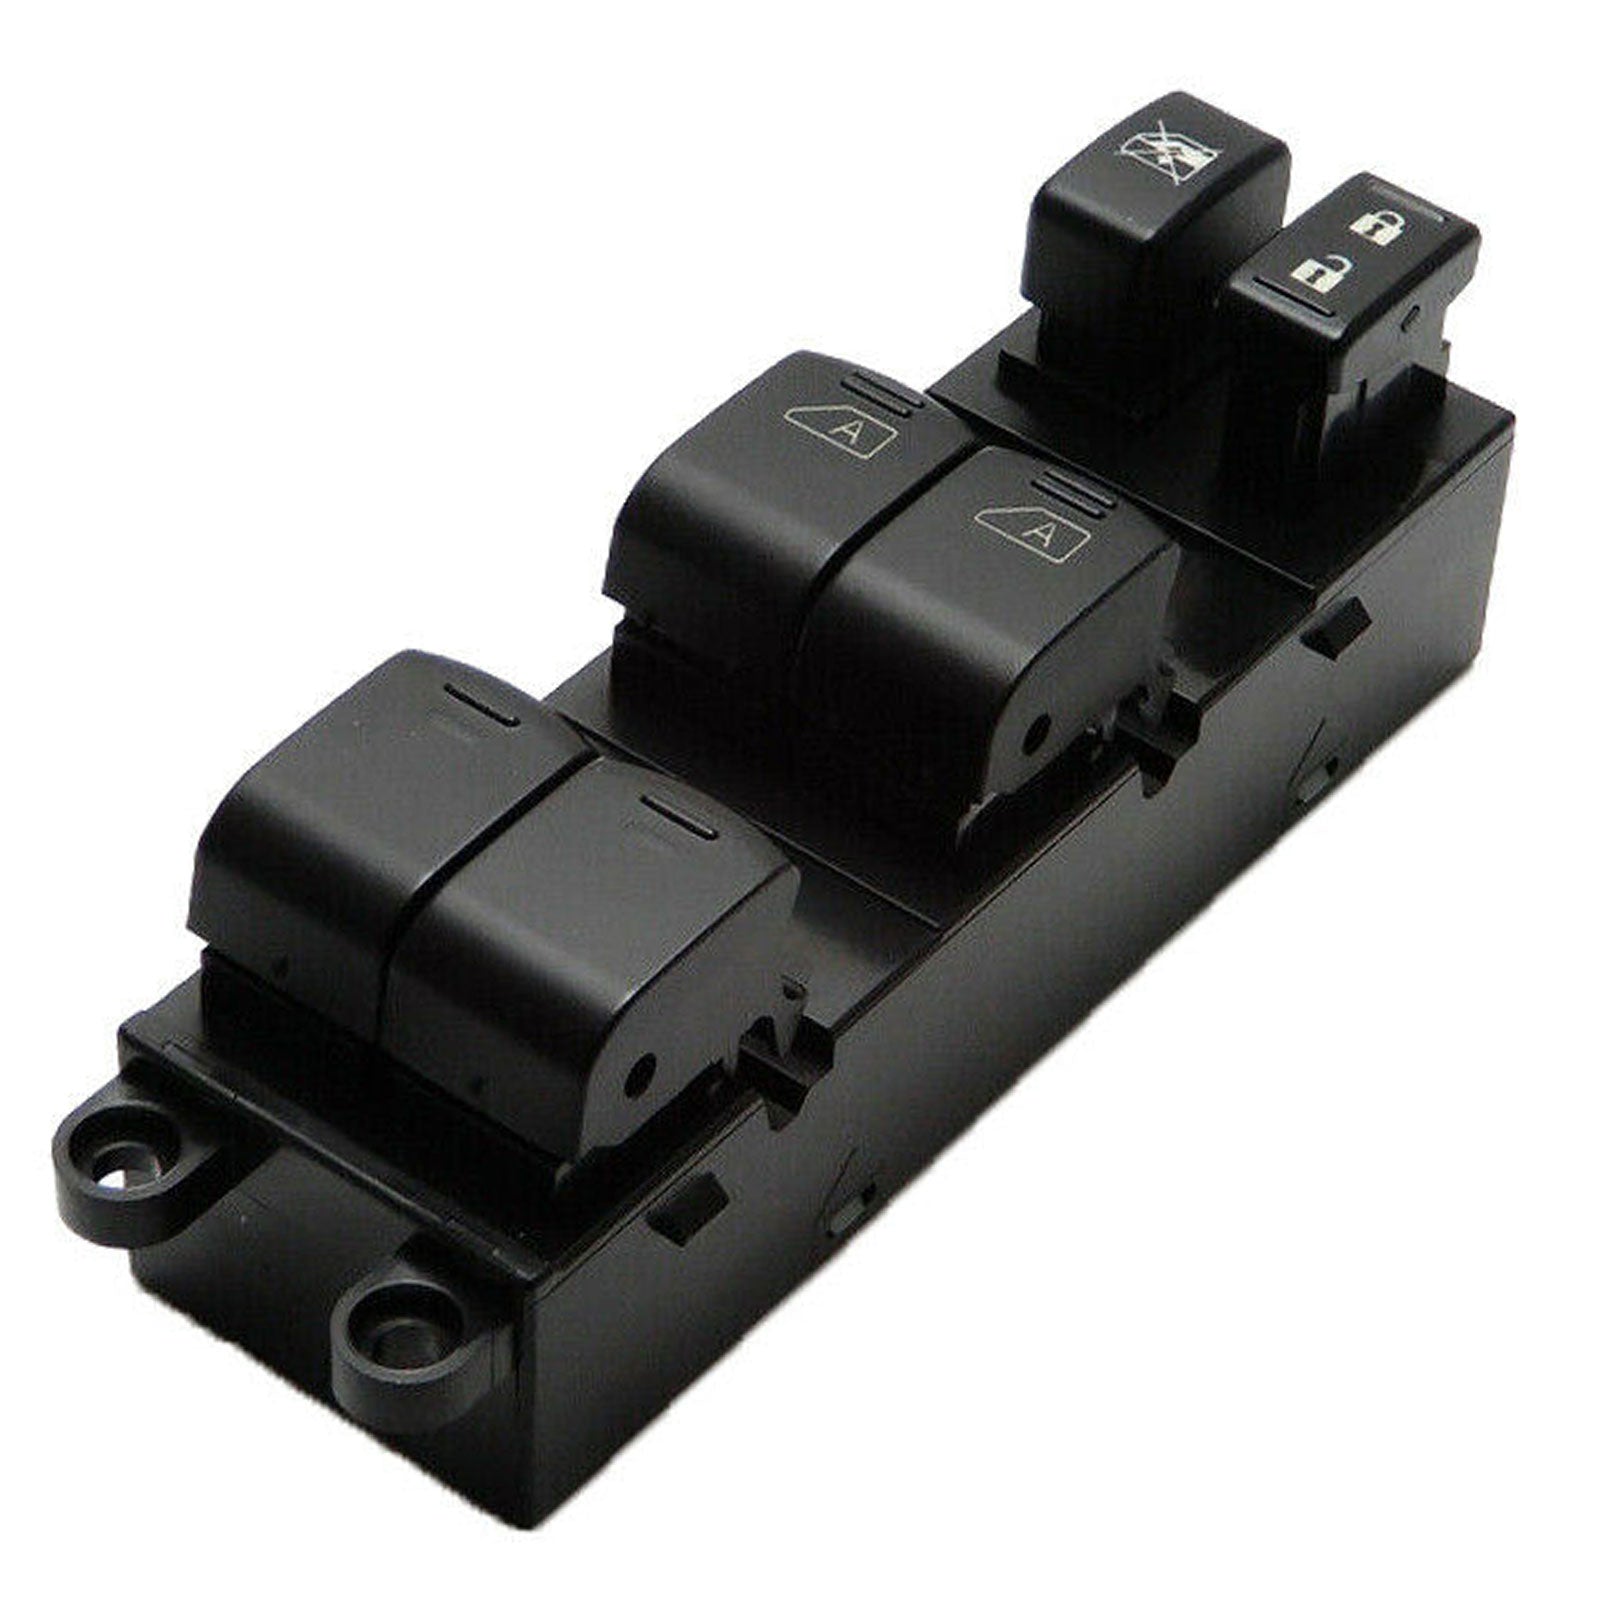 MotorbyMotor Front Left Master Power Window Switch Fits for 2005 2006 Nissan Pathfinder, 2007 Nissan Pathfinder (Single Auto Down) Electric Power Window Switch-Driver Side 25401-ZP40B MotorbyMotor